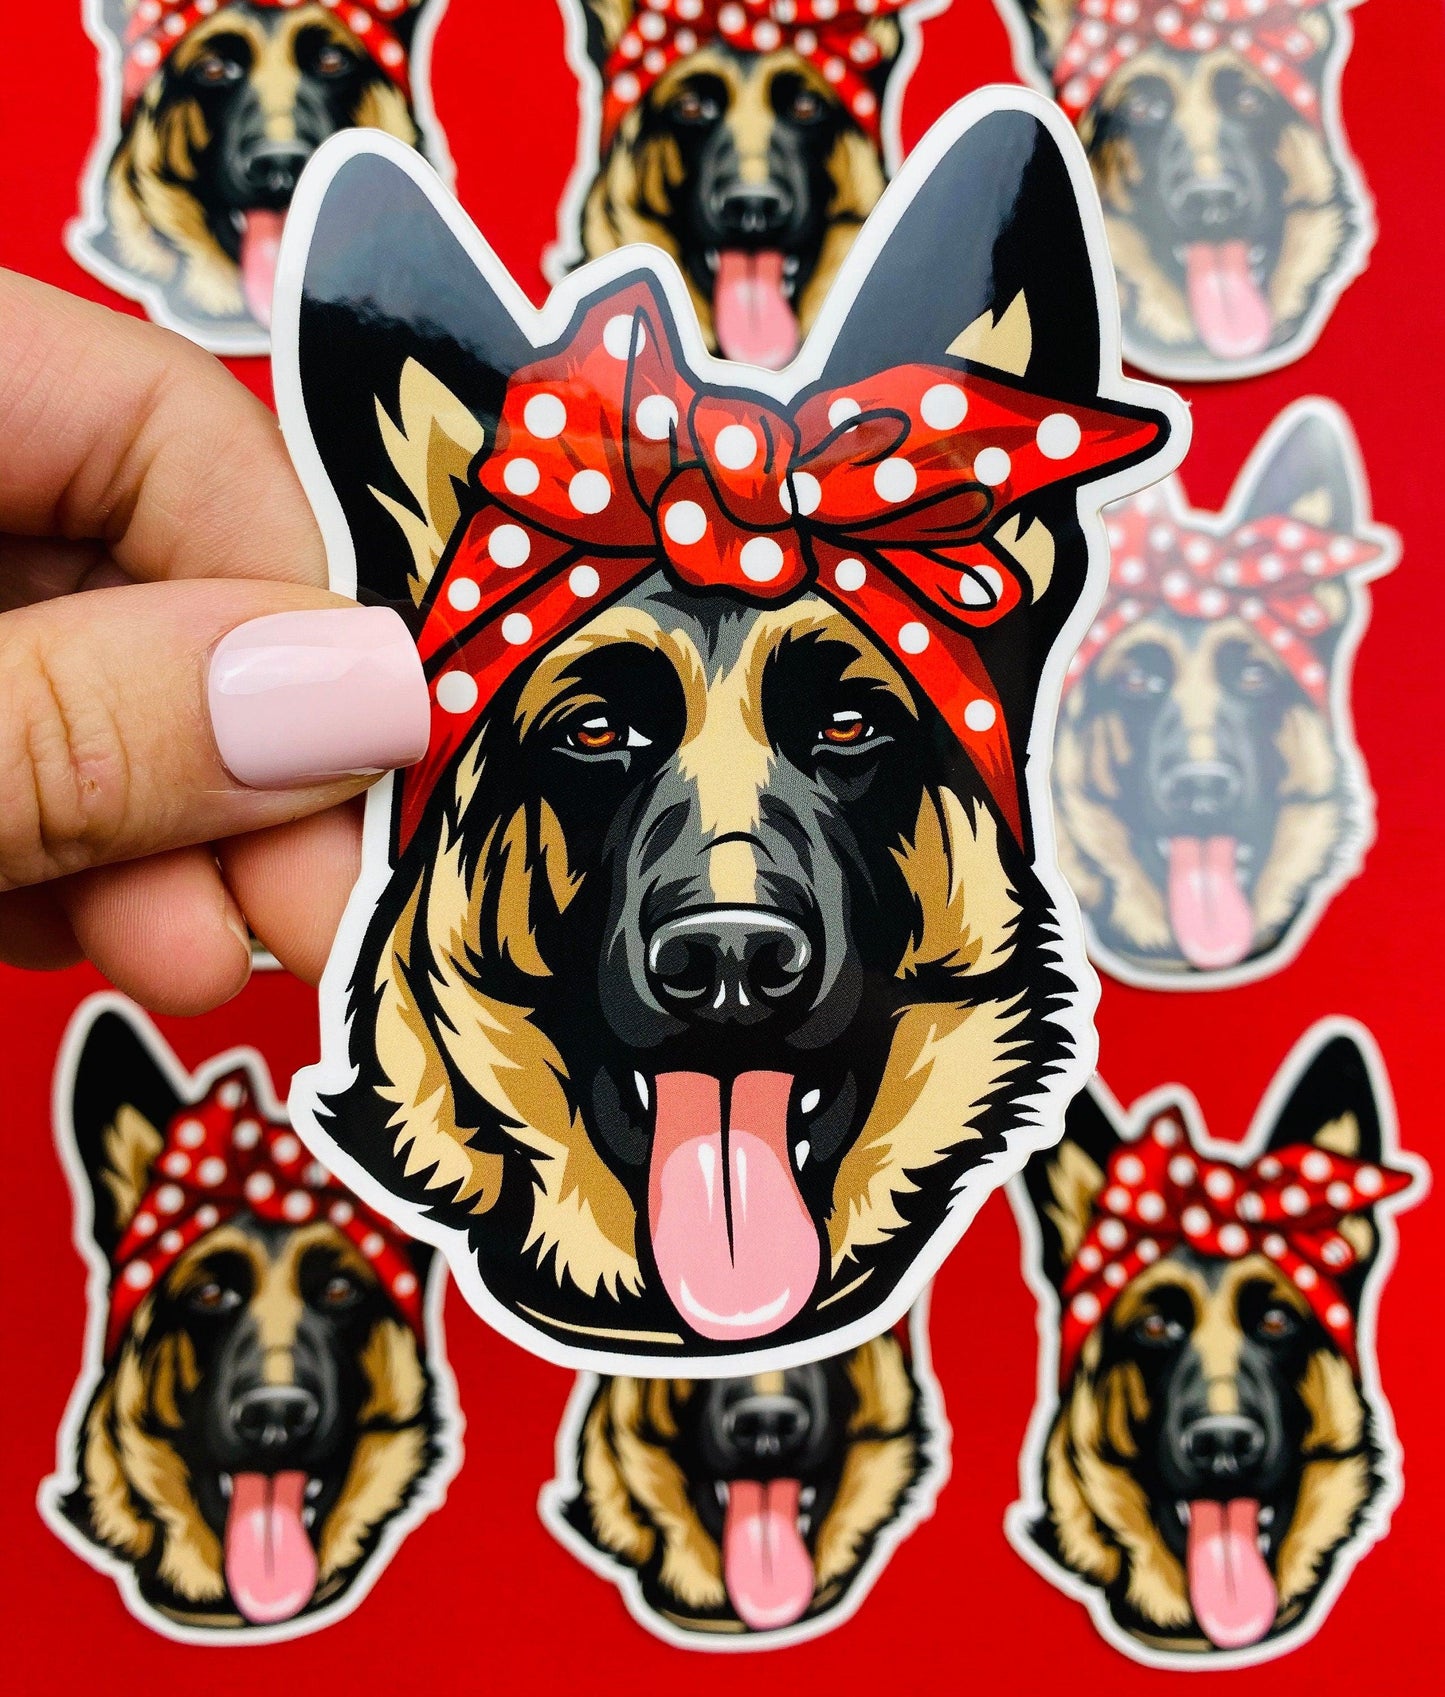 German Shepherd Sticker Red Polka Dot Bow Bandana Cute GSD Dog Decal for Car, Hydroflask, Gifts Under 5 for GSD Shepherd Mom Owner - Ottos Grotto :: Stickers For Your Stuff